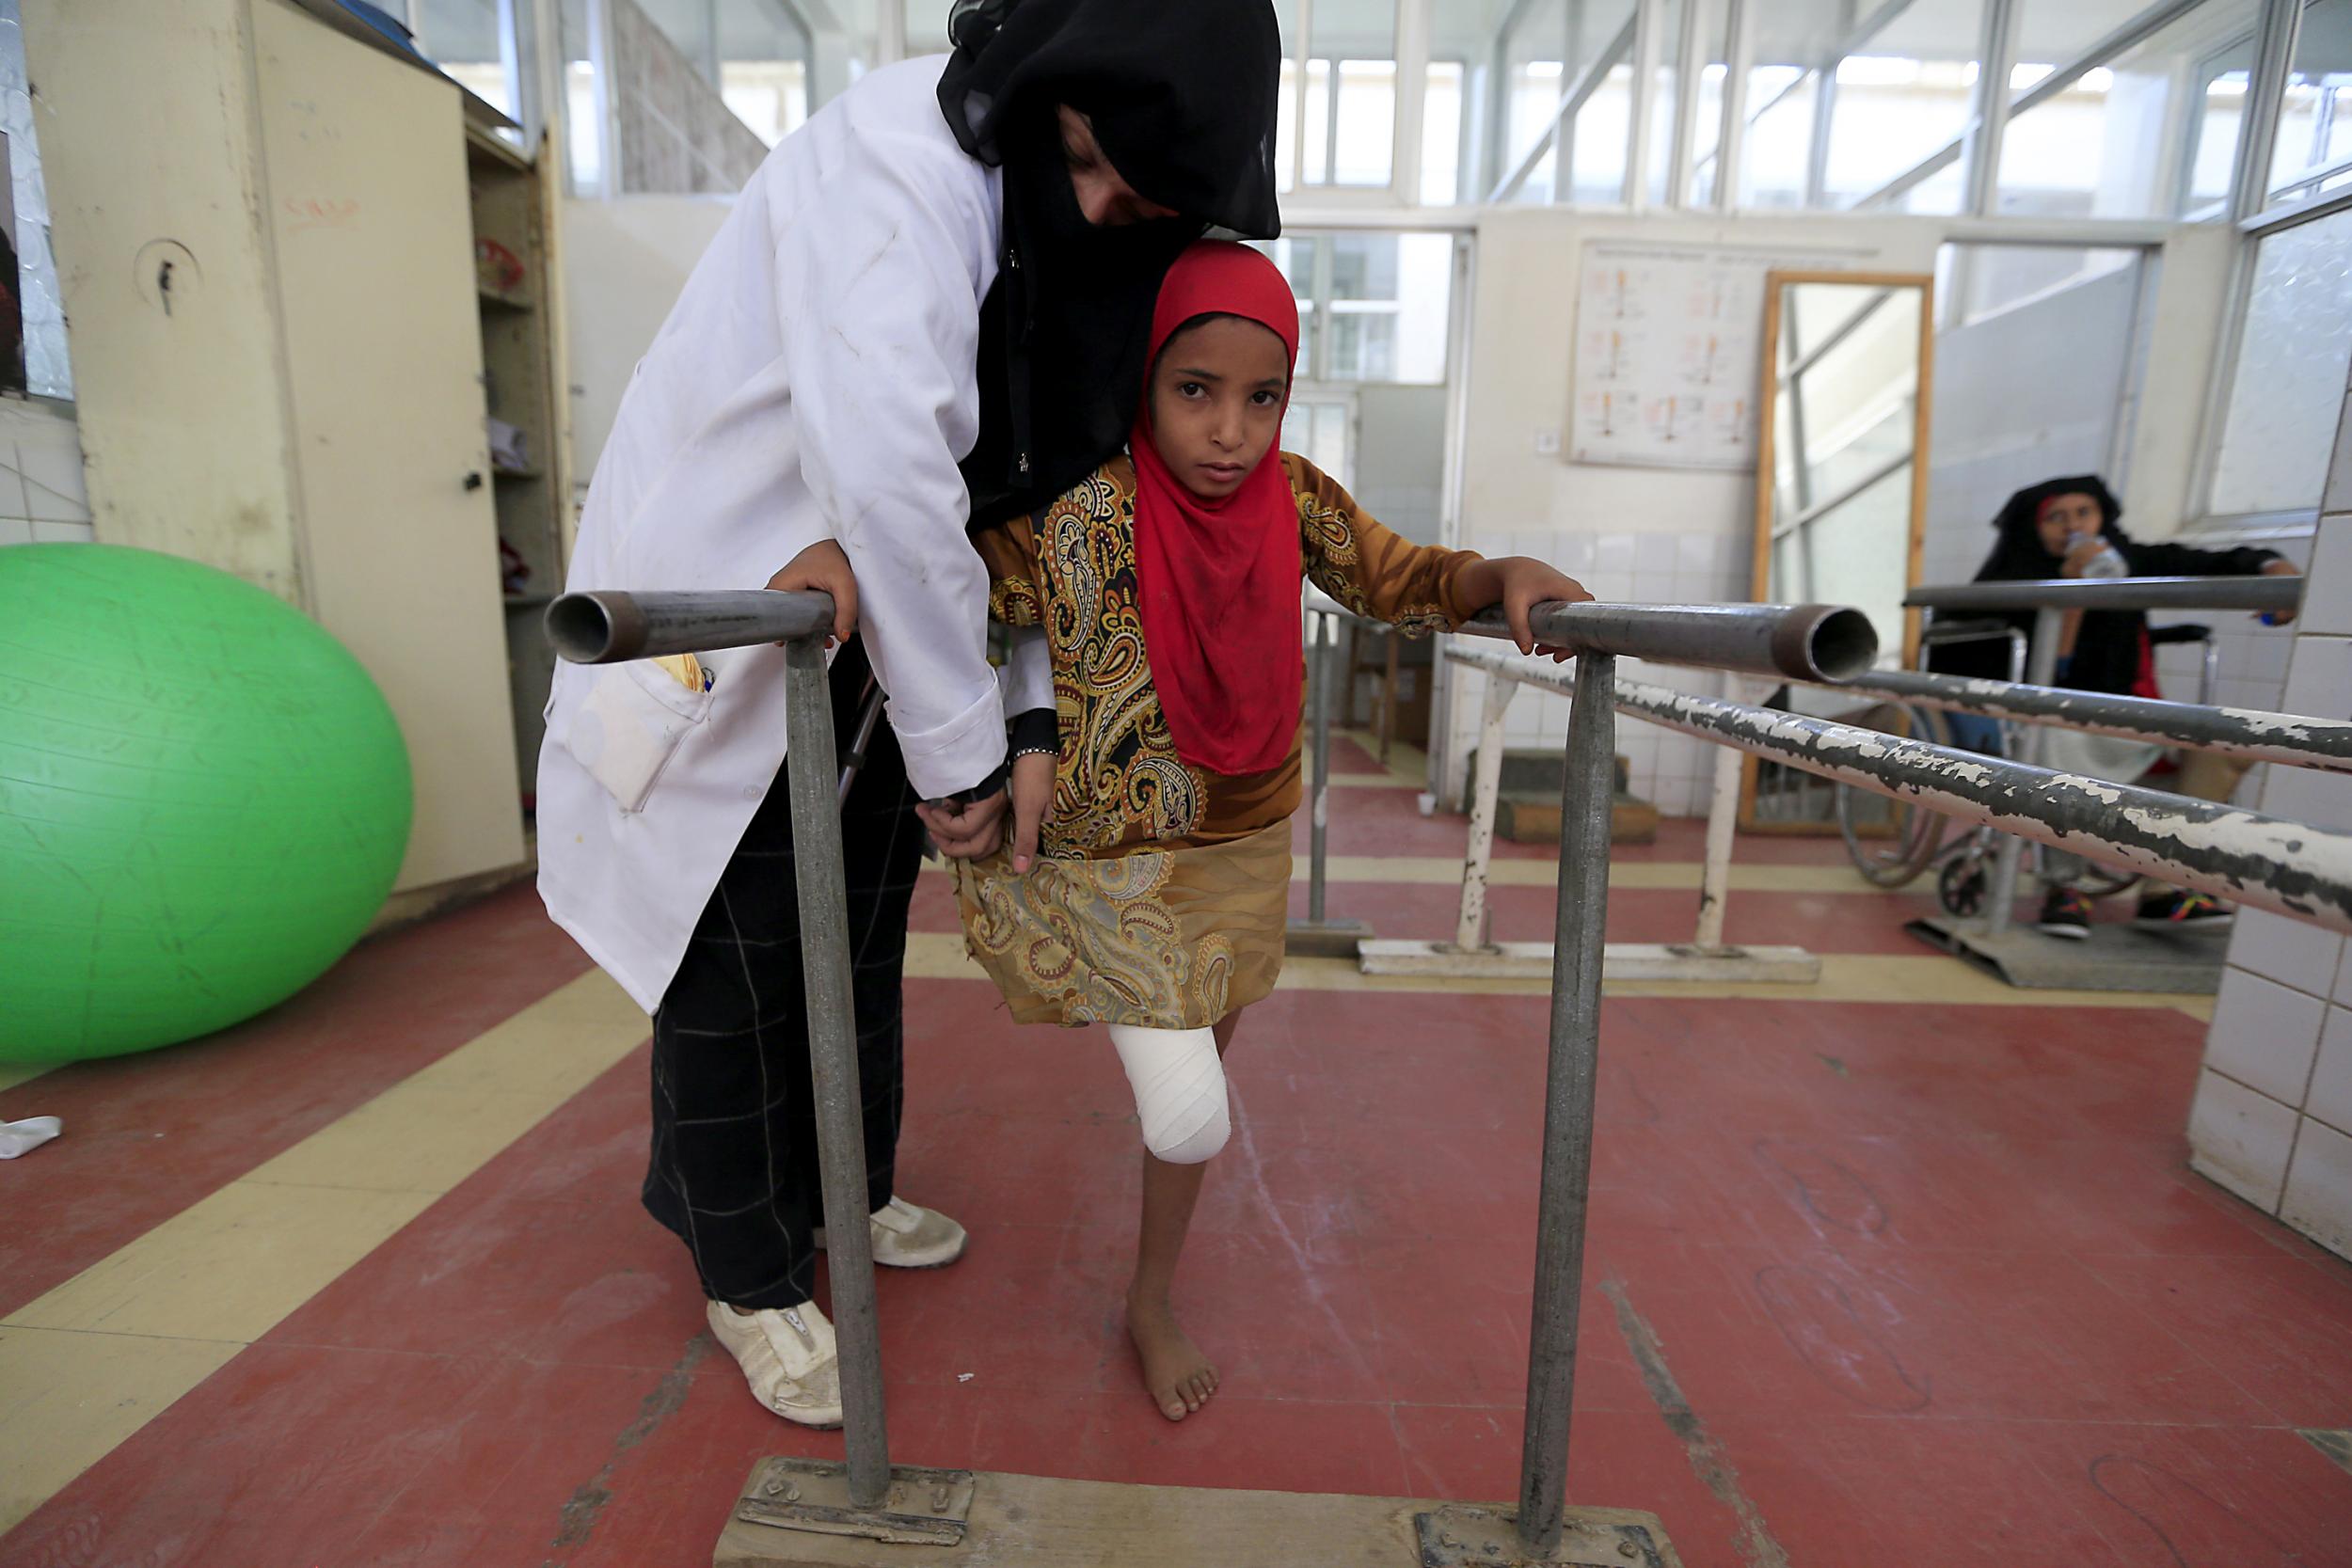 A wounded Yemeni girl exercises at a clinic for prosthetic limbs and physical rehabilitation in the capital Sanaa